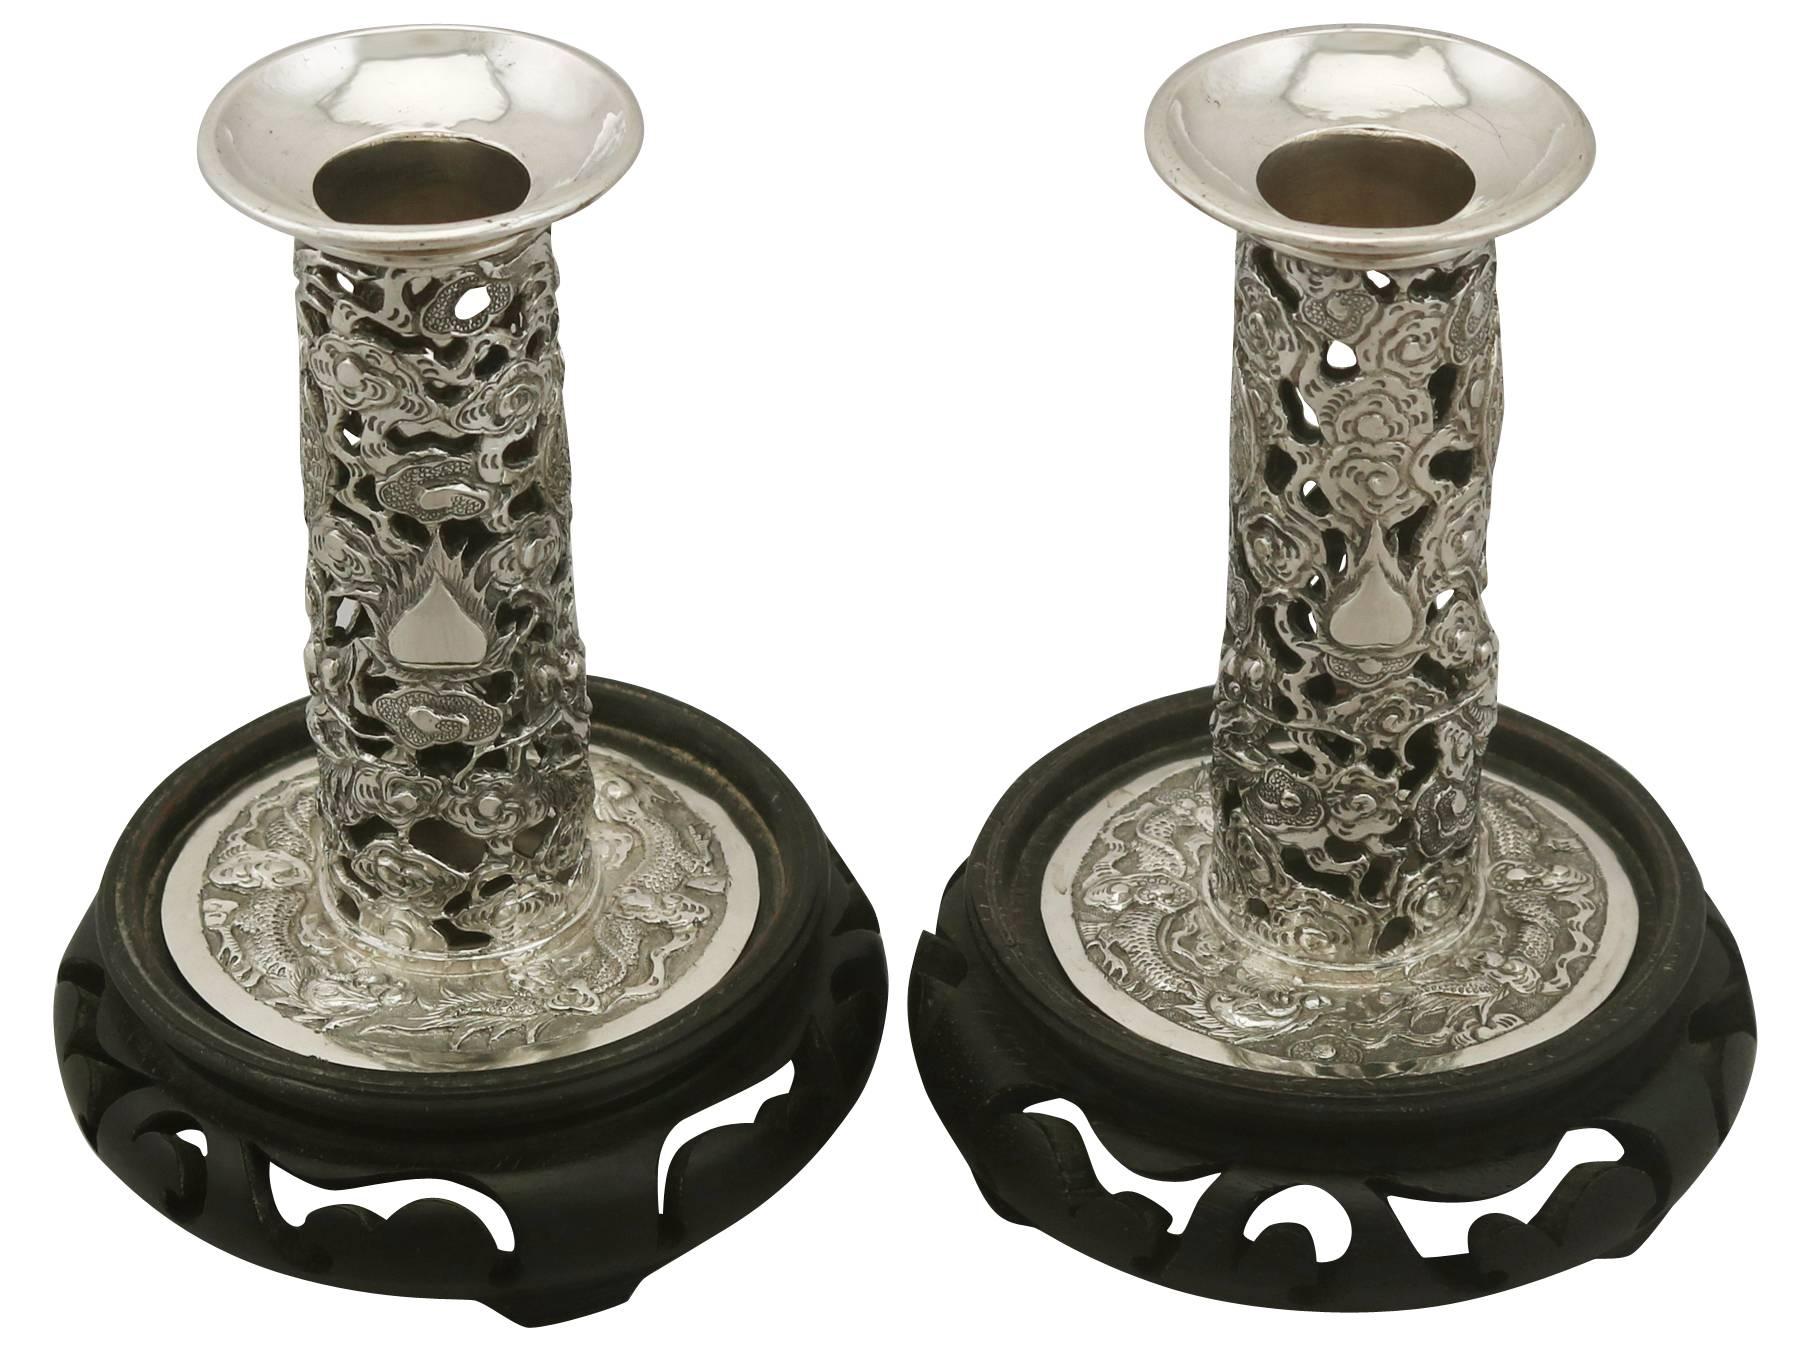 An exceptional, fine and impressive pair of antique Chinese Export silver candlesticks; an addition to our ornamental silverware collection

These exceptional antique Chinese Export silver (CES) candlesticks have a cylindrical shaped column to a